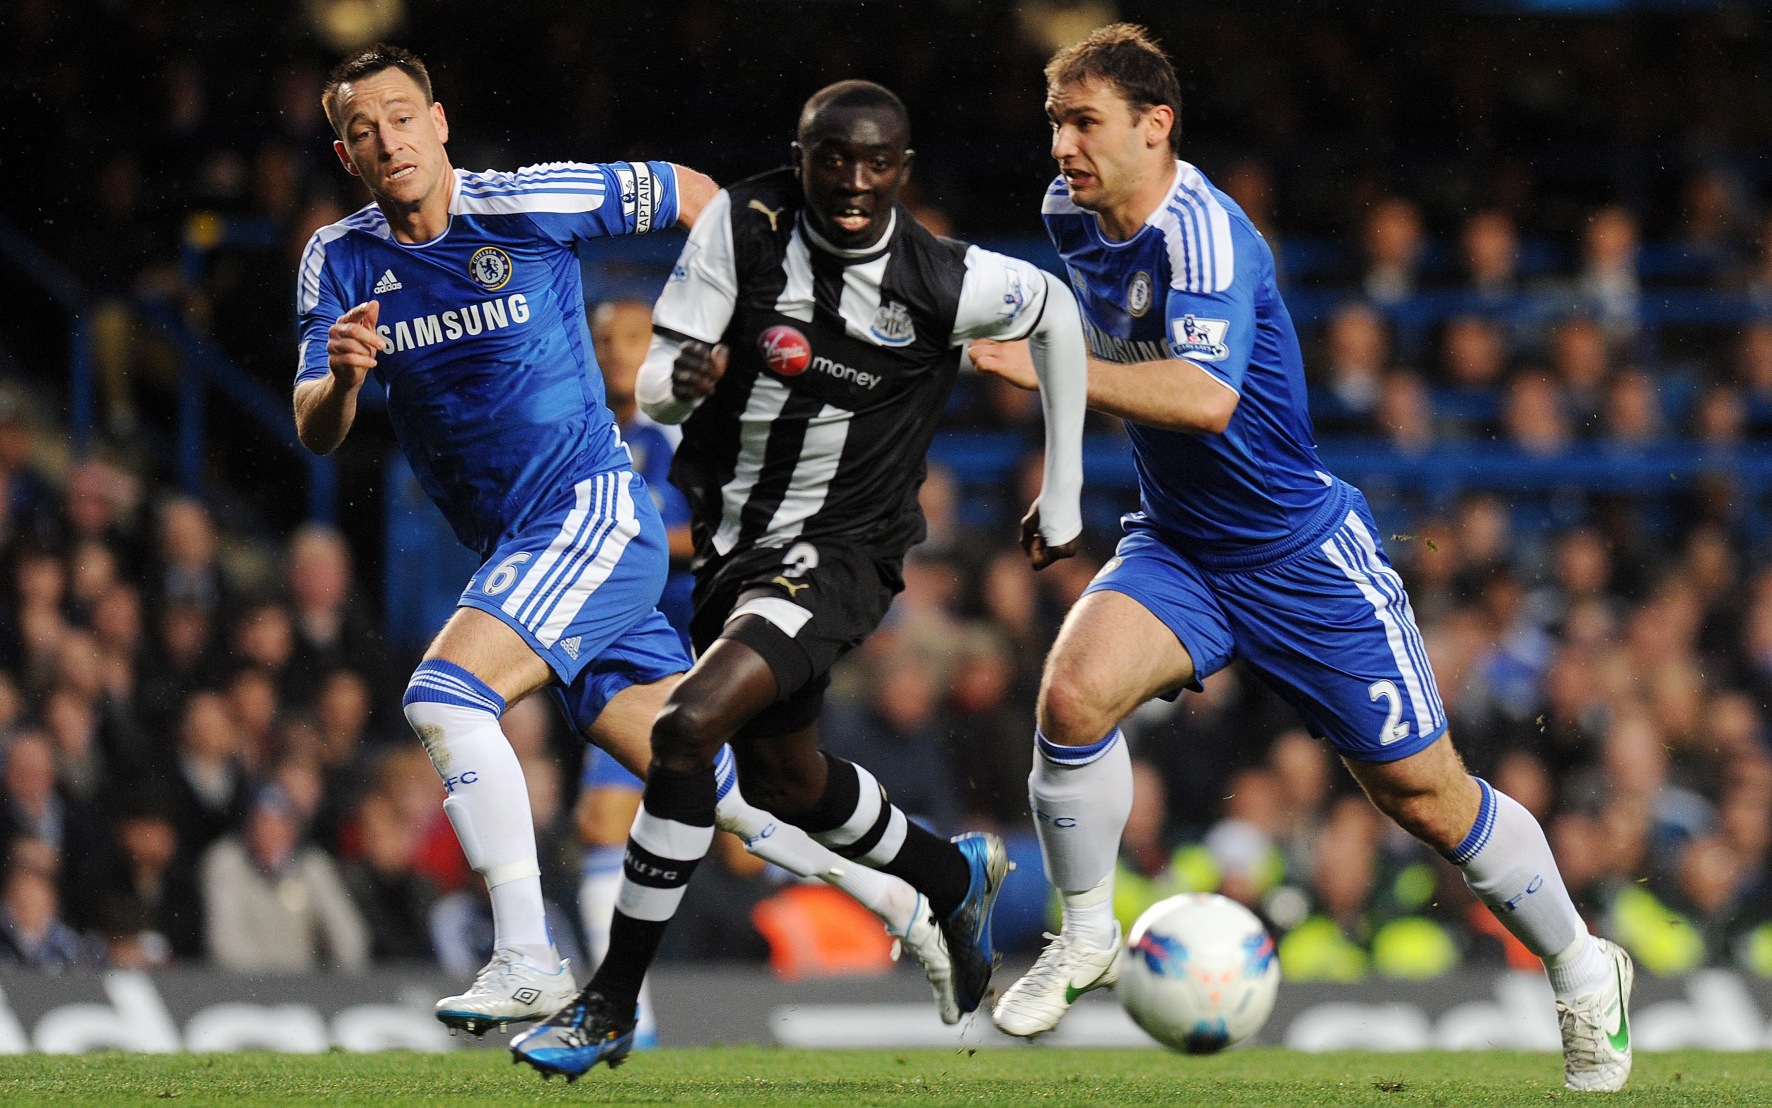 Newcastle United's Papiss Cisse (C) out runs Chelsea's John Terry (L) and Branislav Ivanovic (right) during an English Premier League soccer match at Stamford Bridge in London. Photo: EPA